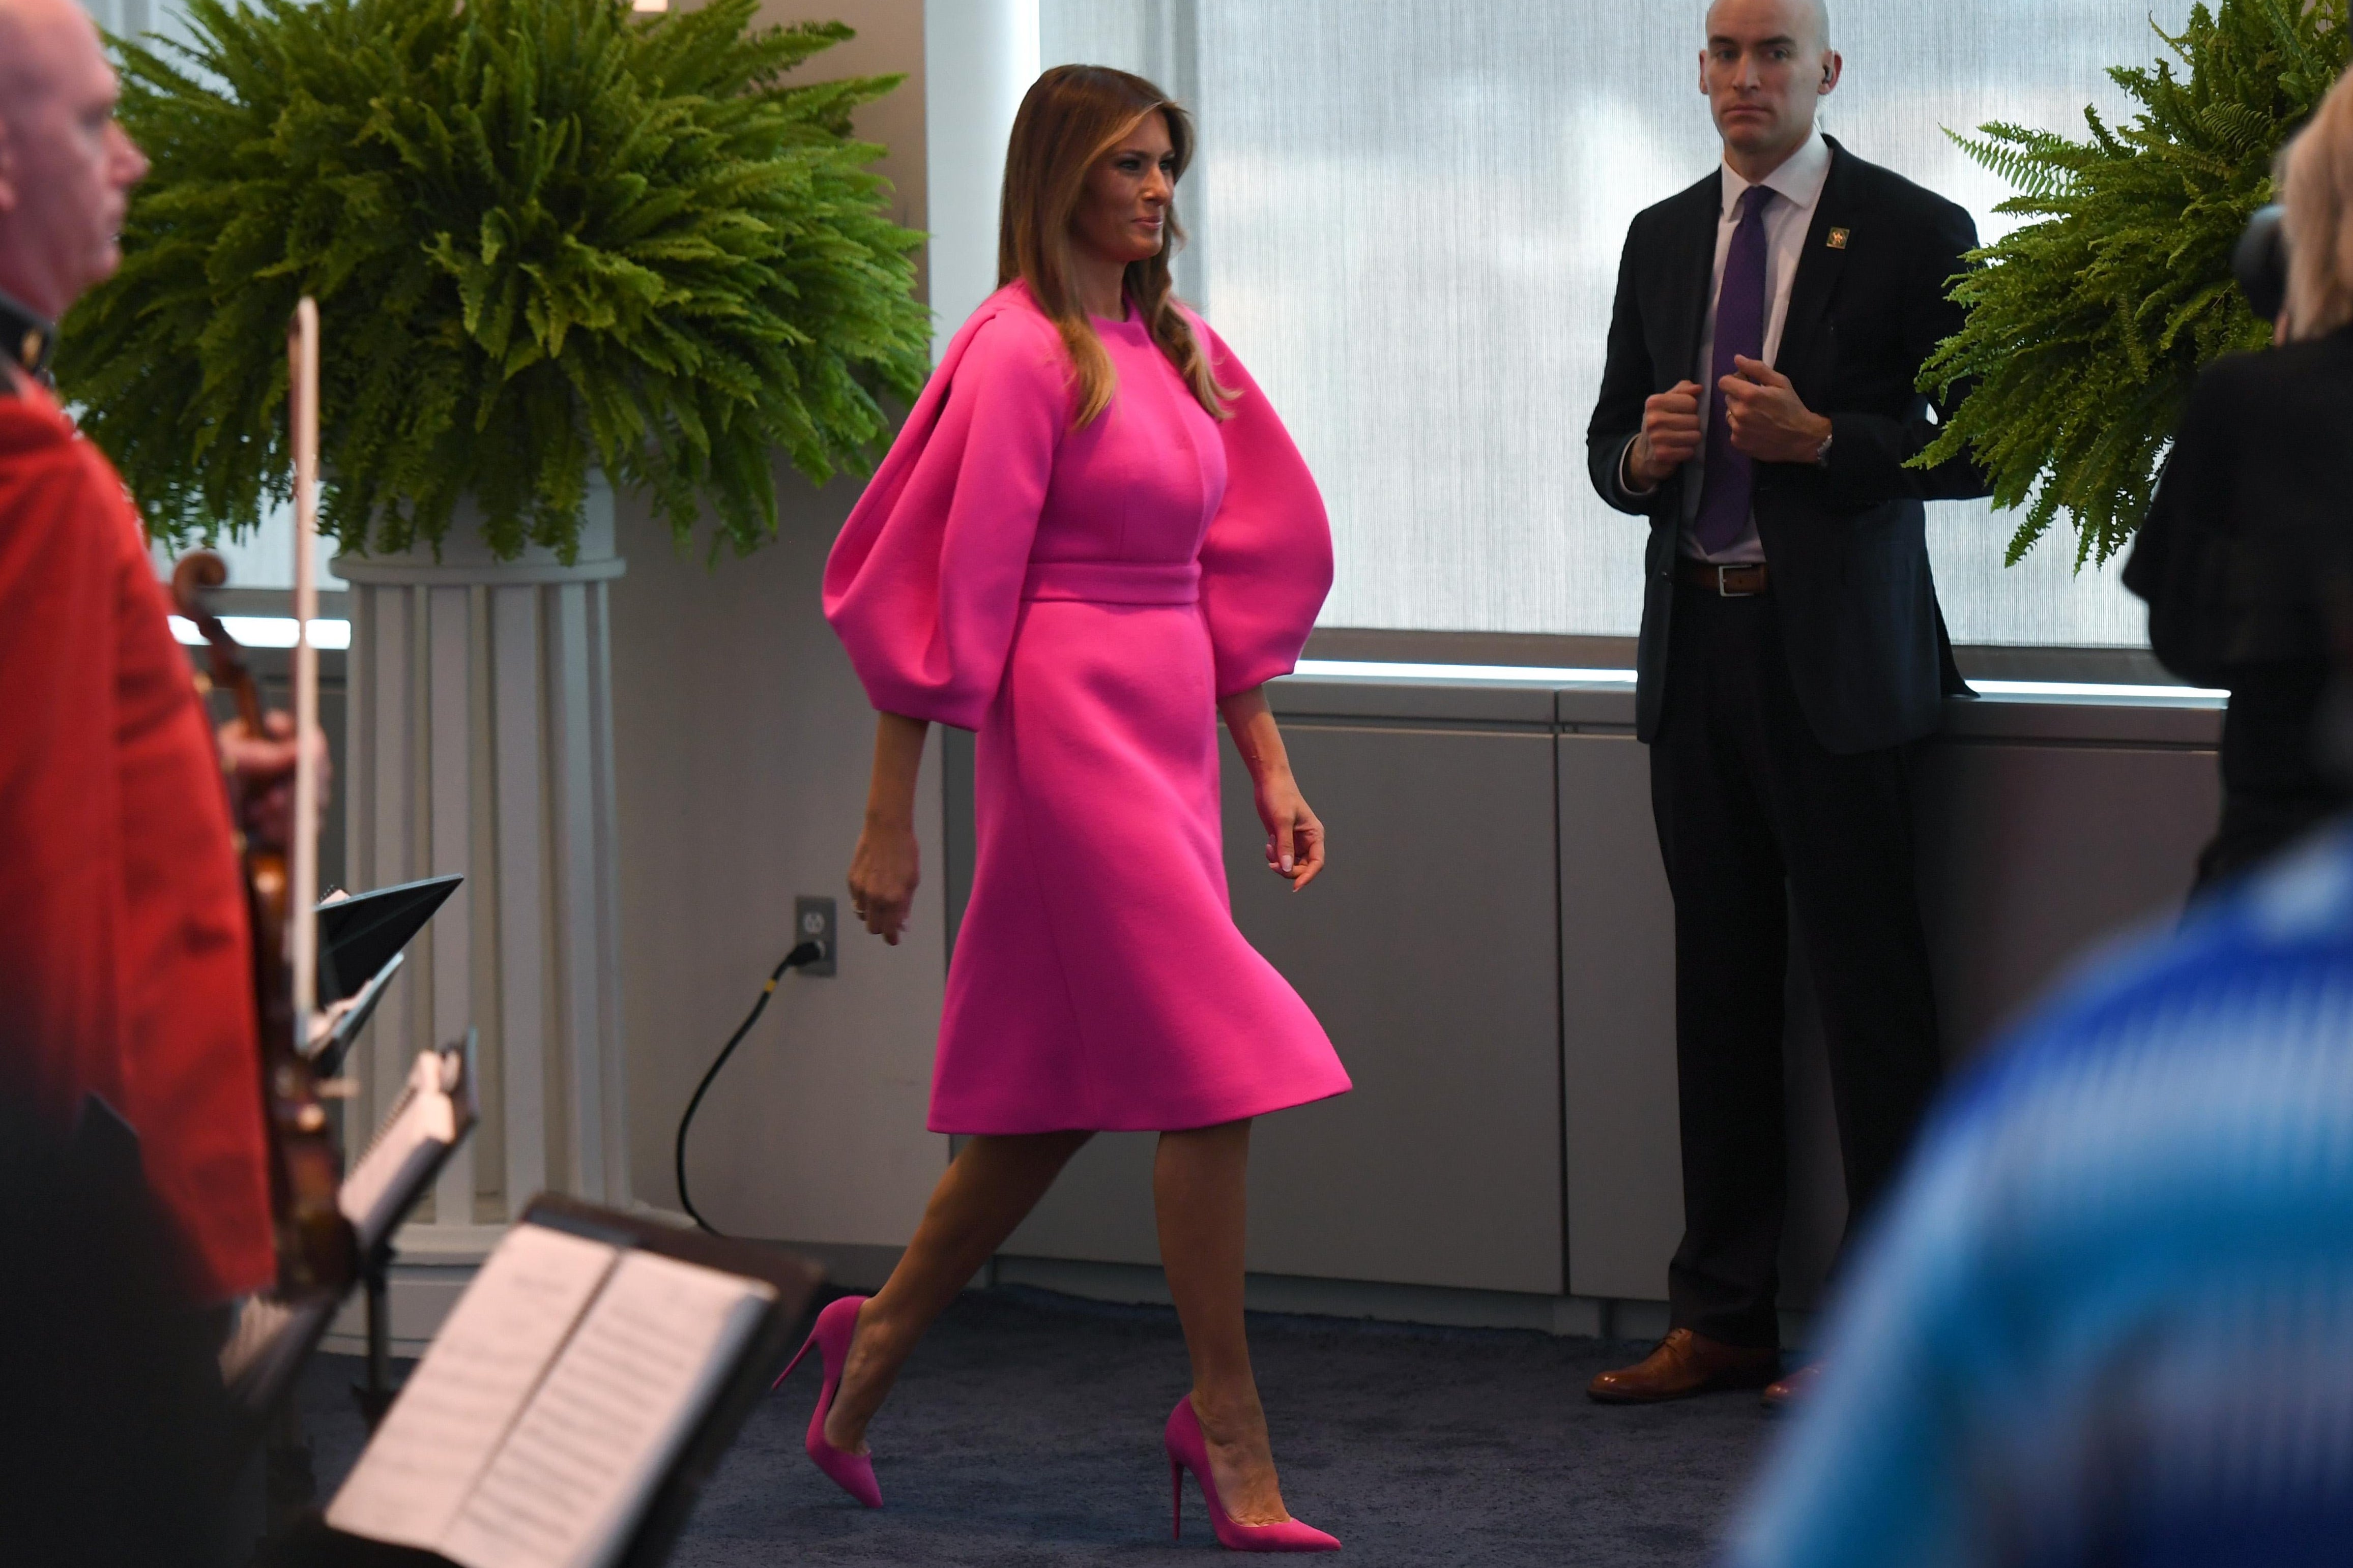 Melania Trump walks past a fern, as several people look on, wearing a hot pink dress with puffy long sleeves and matching heels.